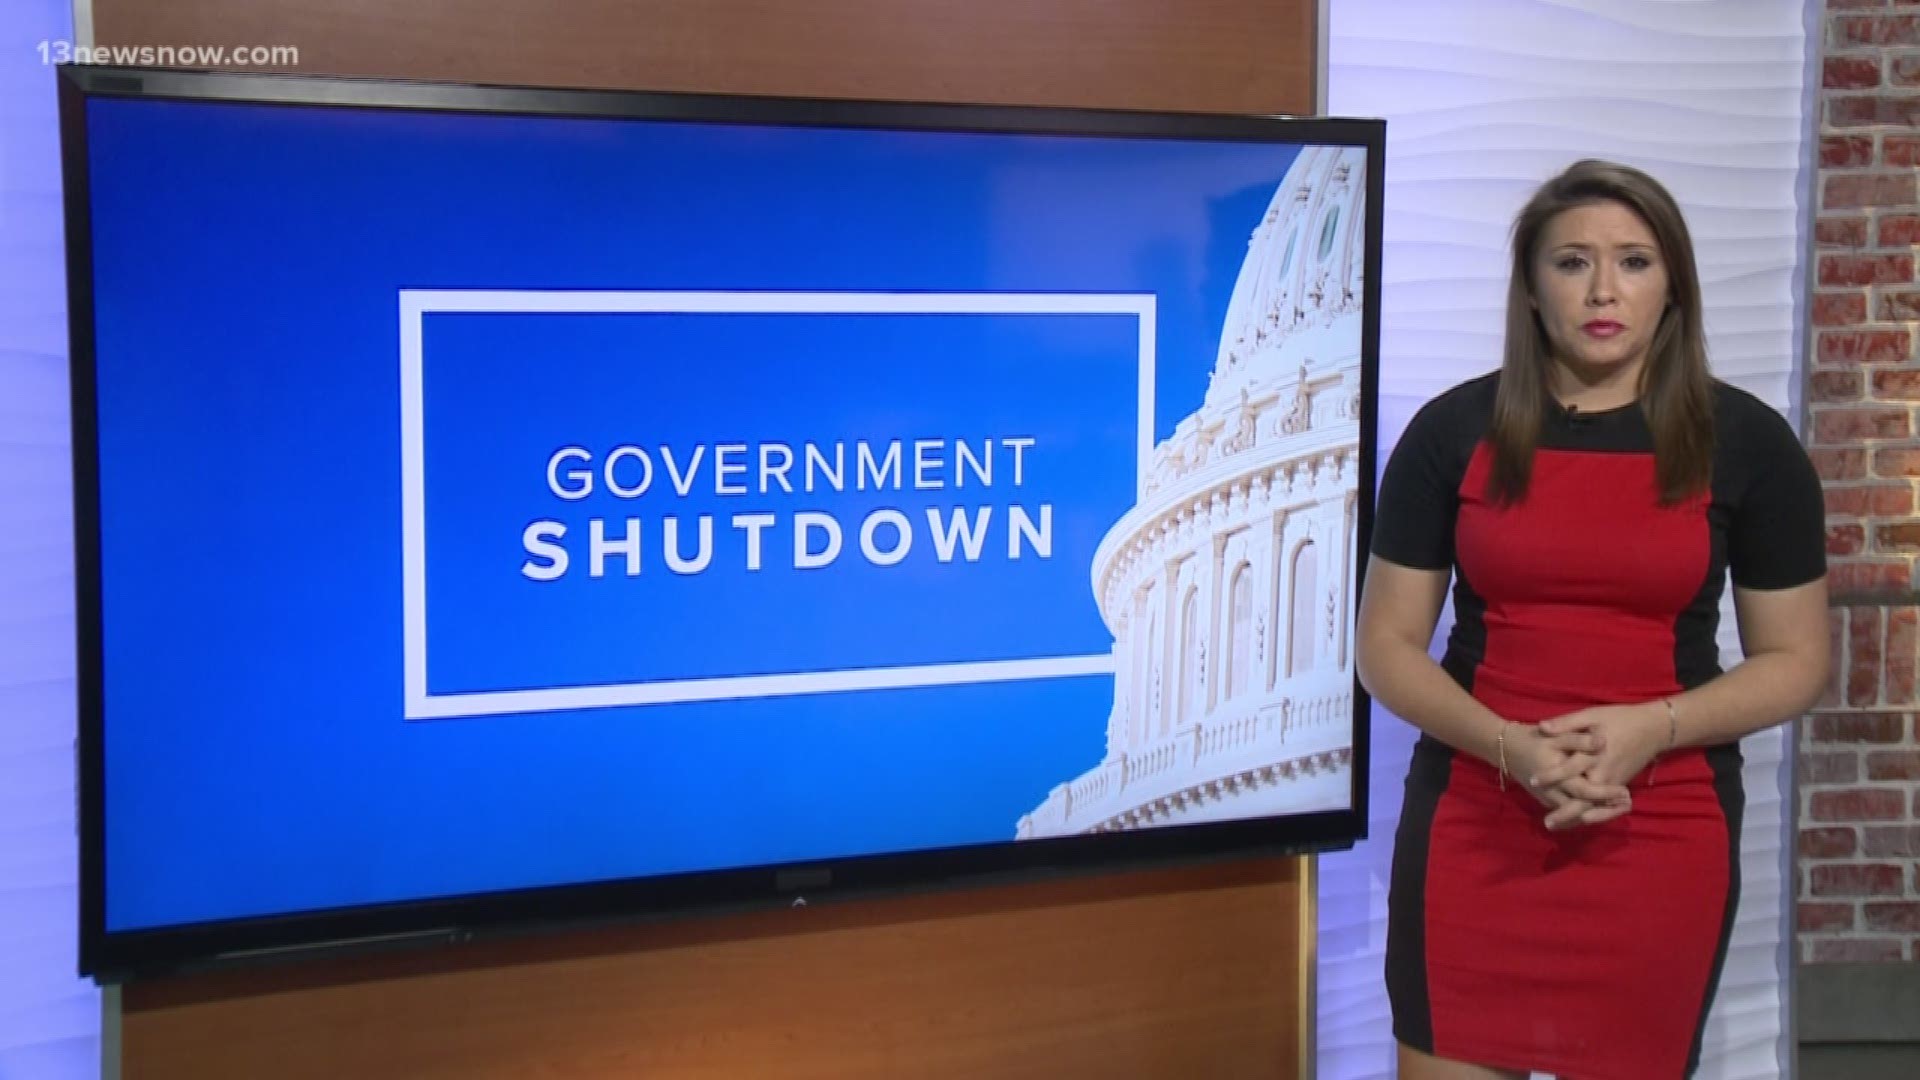 The government shutdown is temporarily over, but how long will that last?